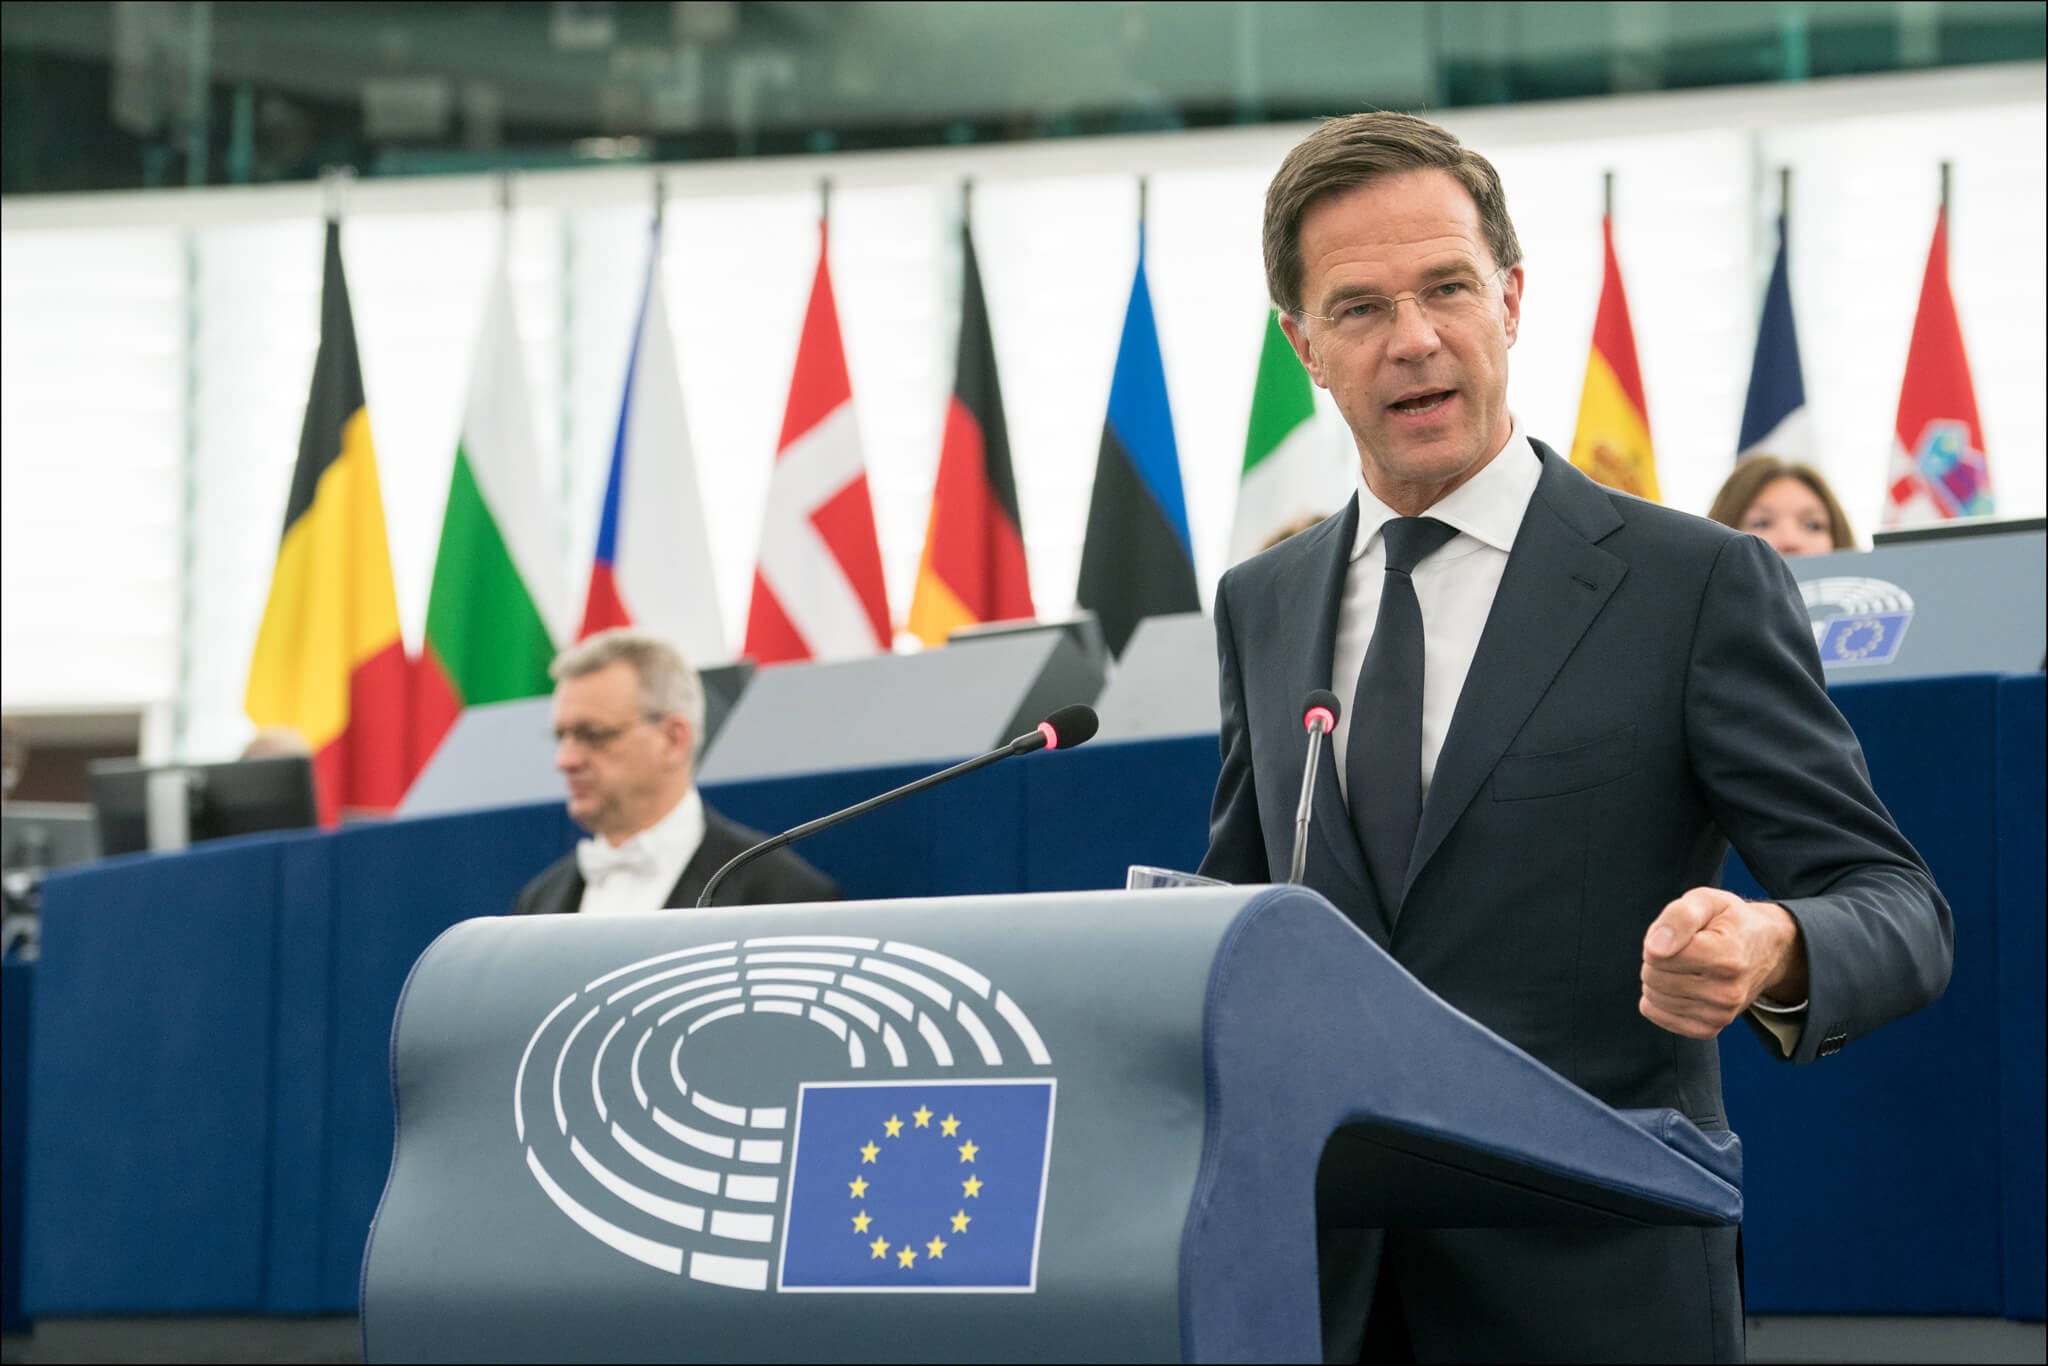 Prime Minister of the Netherlands Mark Rutte debated the future of Europe with MEPs and EU Commission First Vice-President Frans Timmermans on Wednesday.